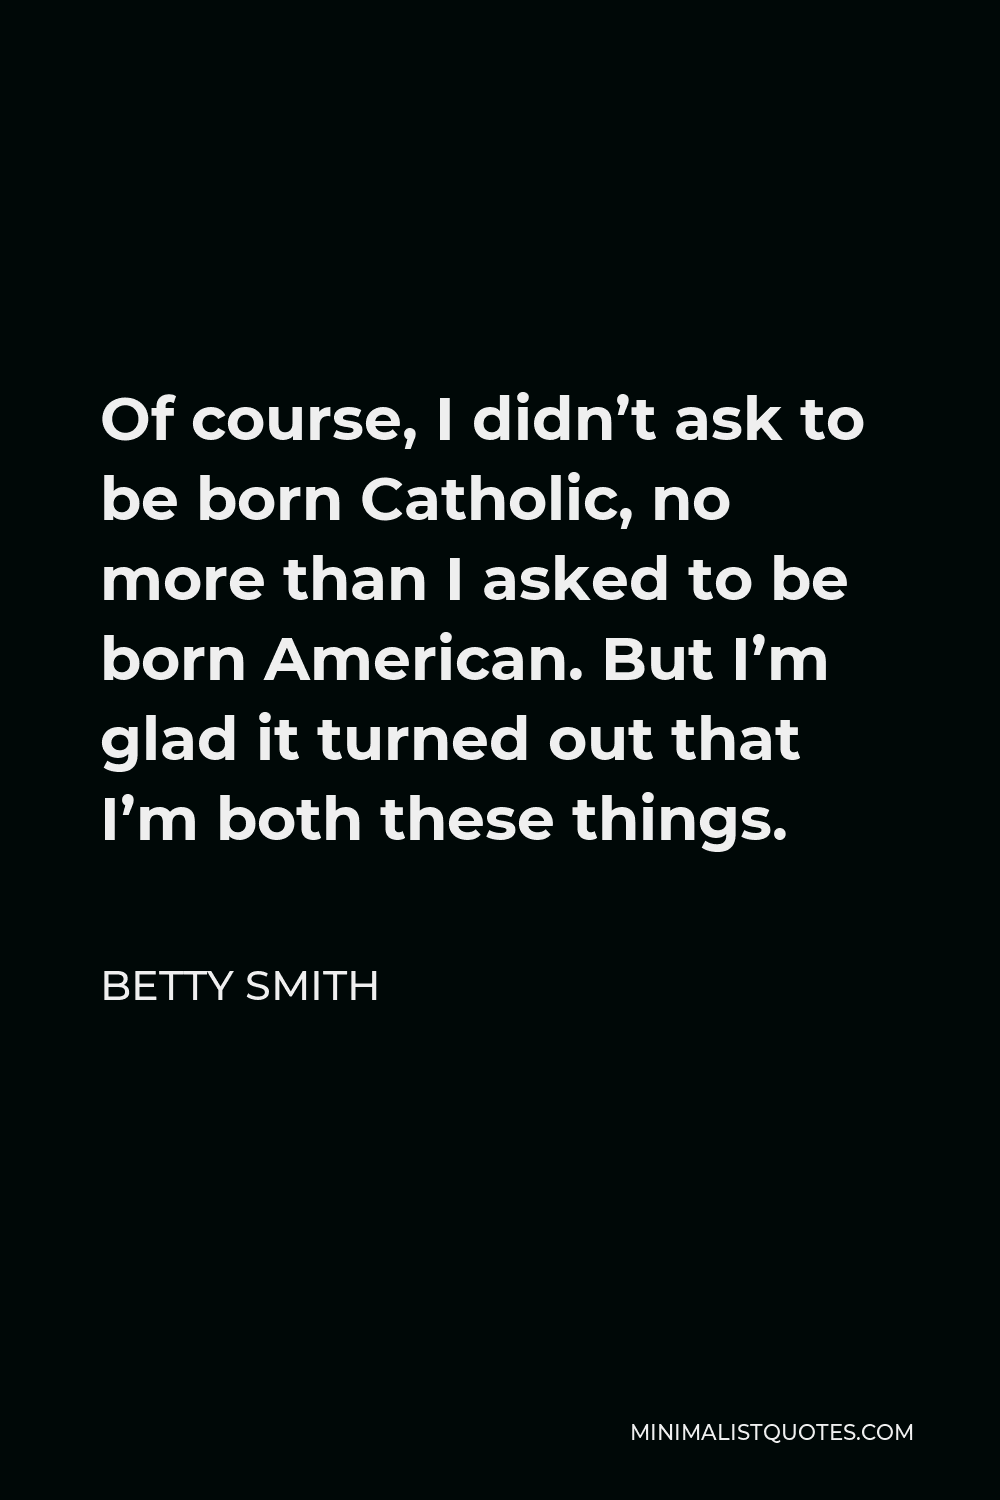 Betty Smith Quote - Of course, I didn’t ask to be born Catholic, no more than I asked to be born American. But I’m glad it turned out that I’m both these things.